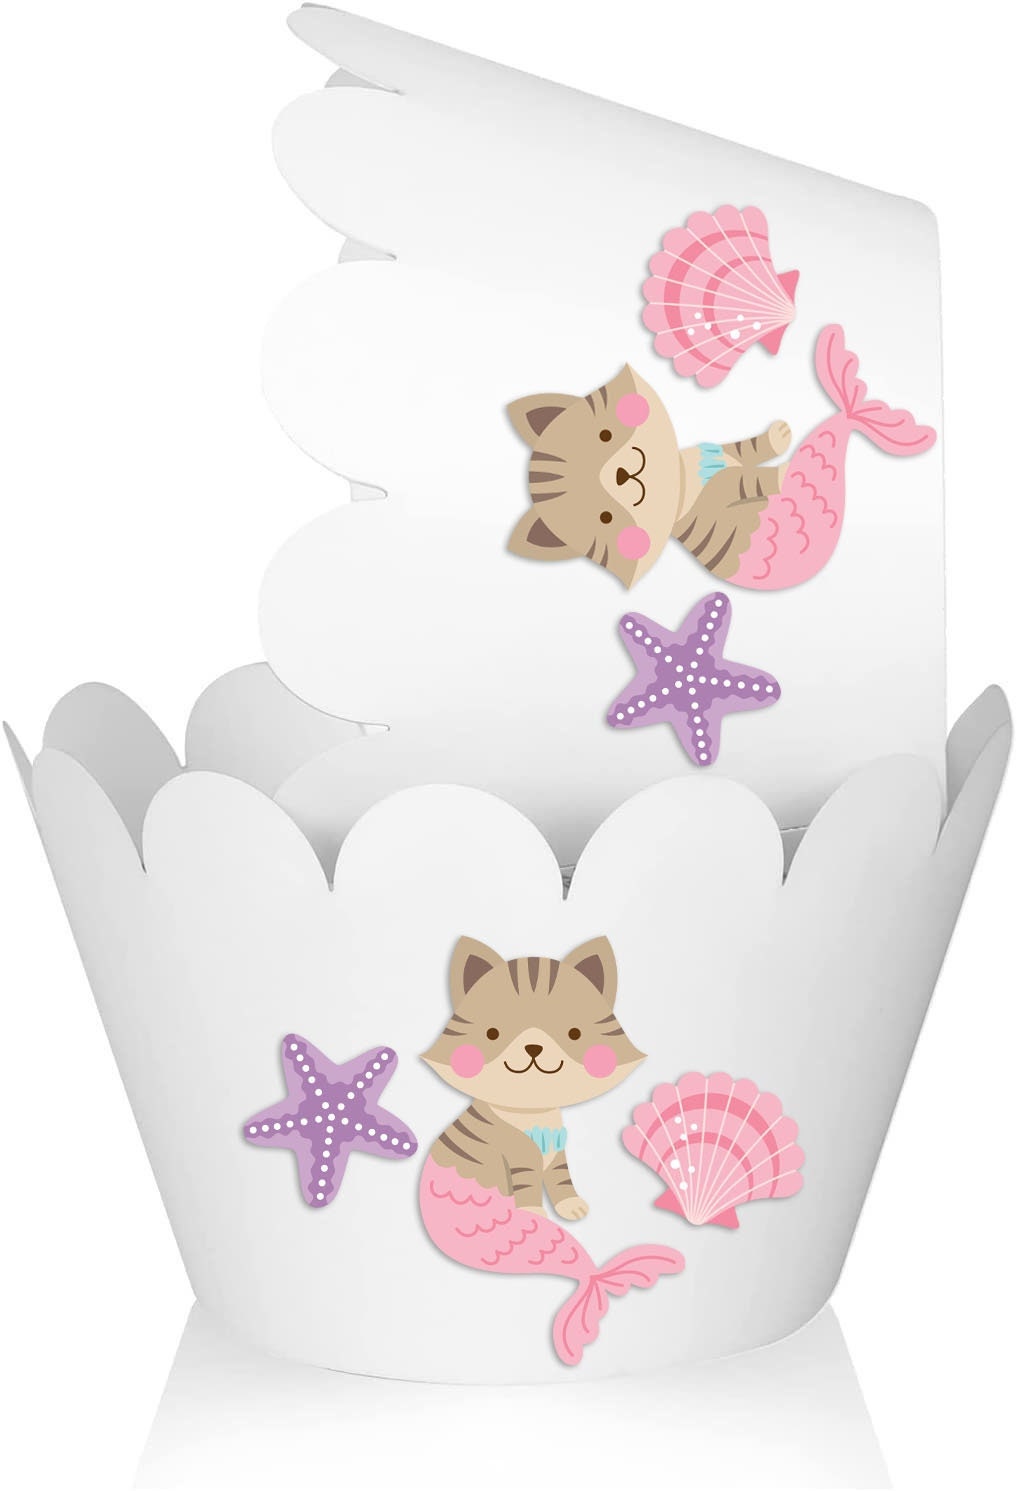 Mermaid Cat (Mercat) Cupcake Wrappers - Set of 10, Perfect for Unique Themed Parties and Events!